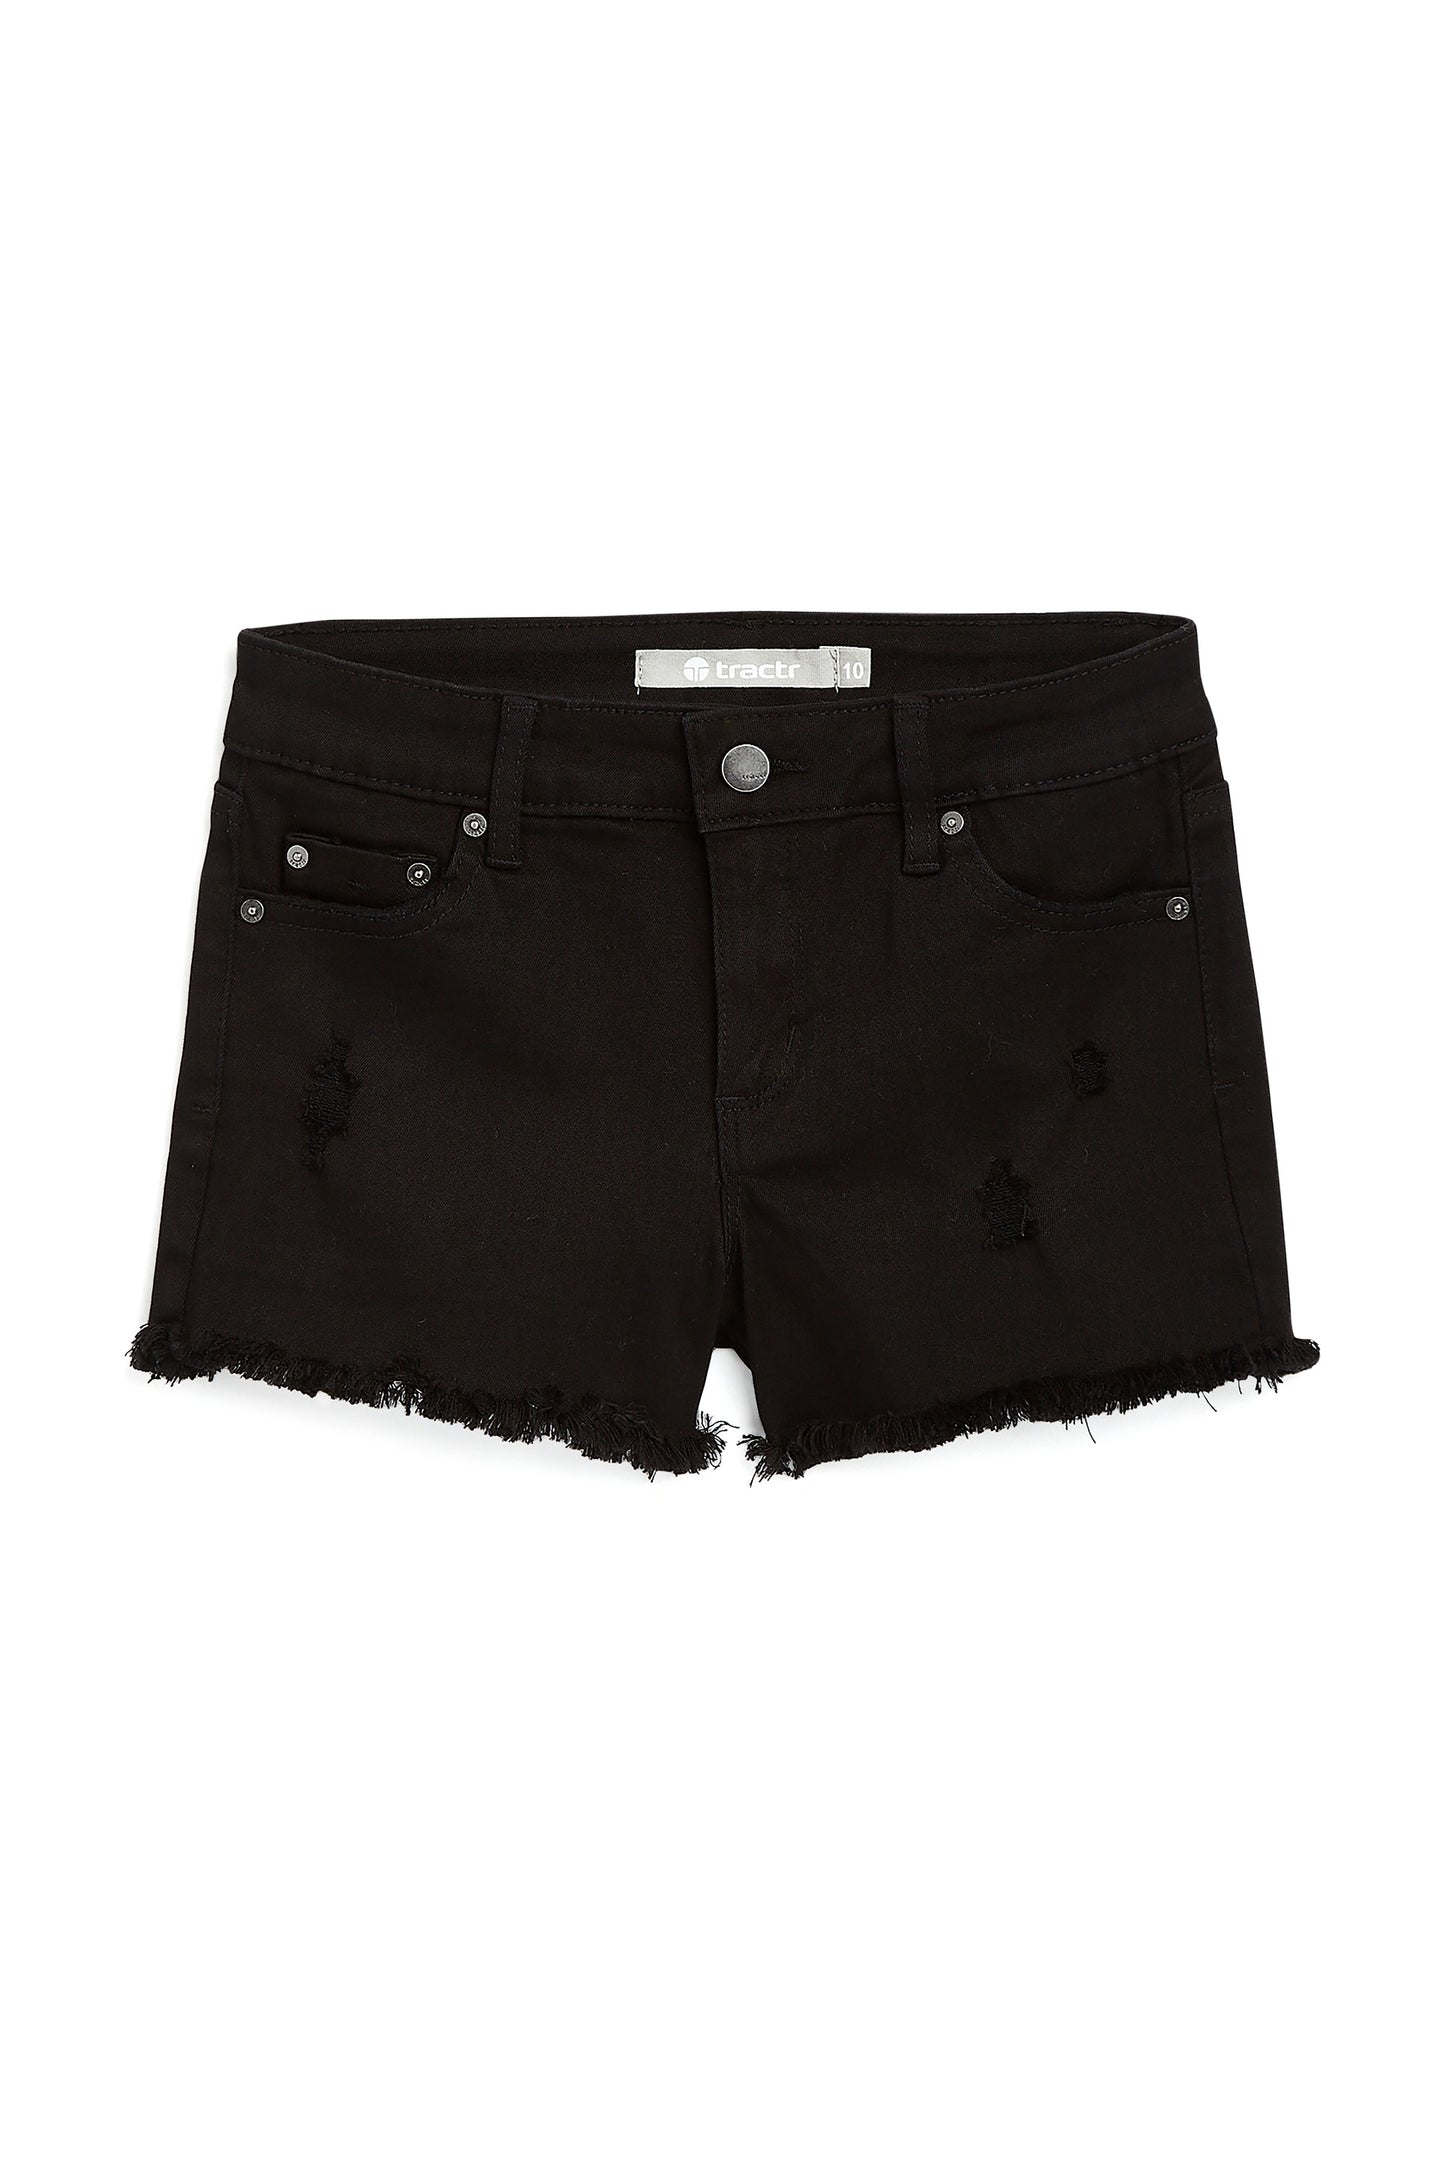 BRITTANY - 5 POCKETS FRAY SHORTS WITH DESTRUCTION IN BLACK